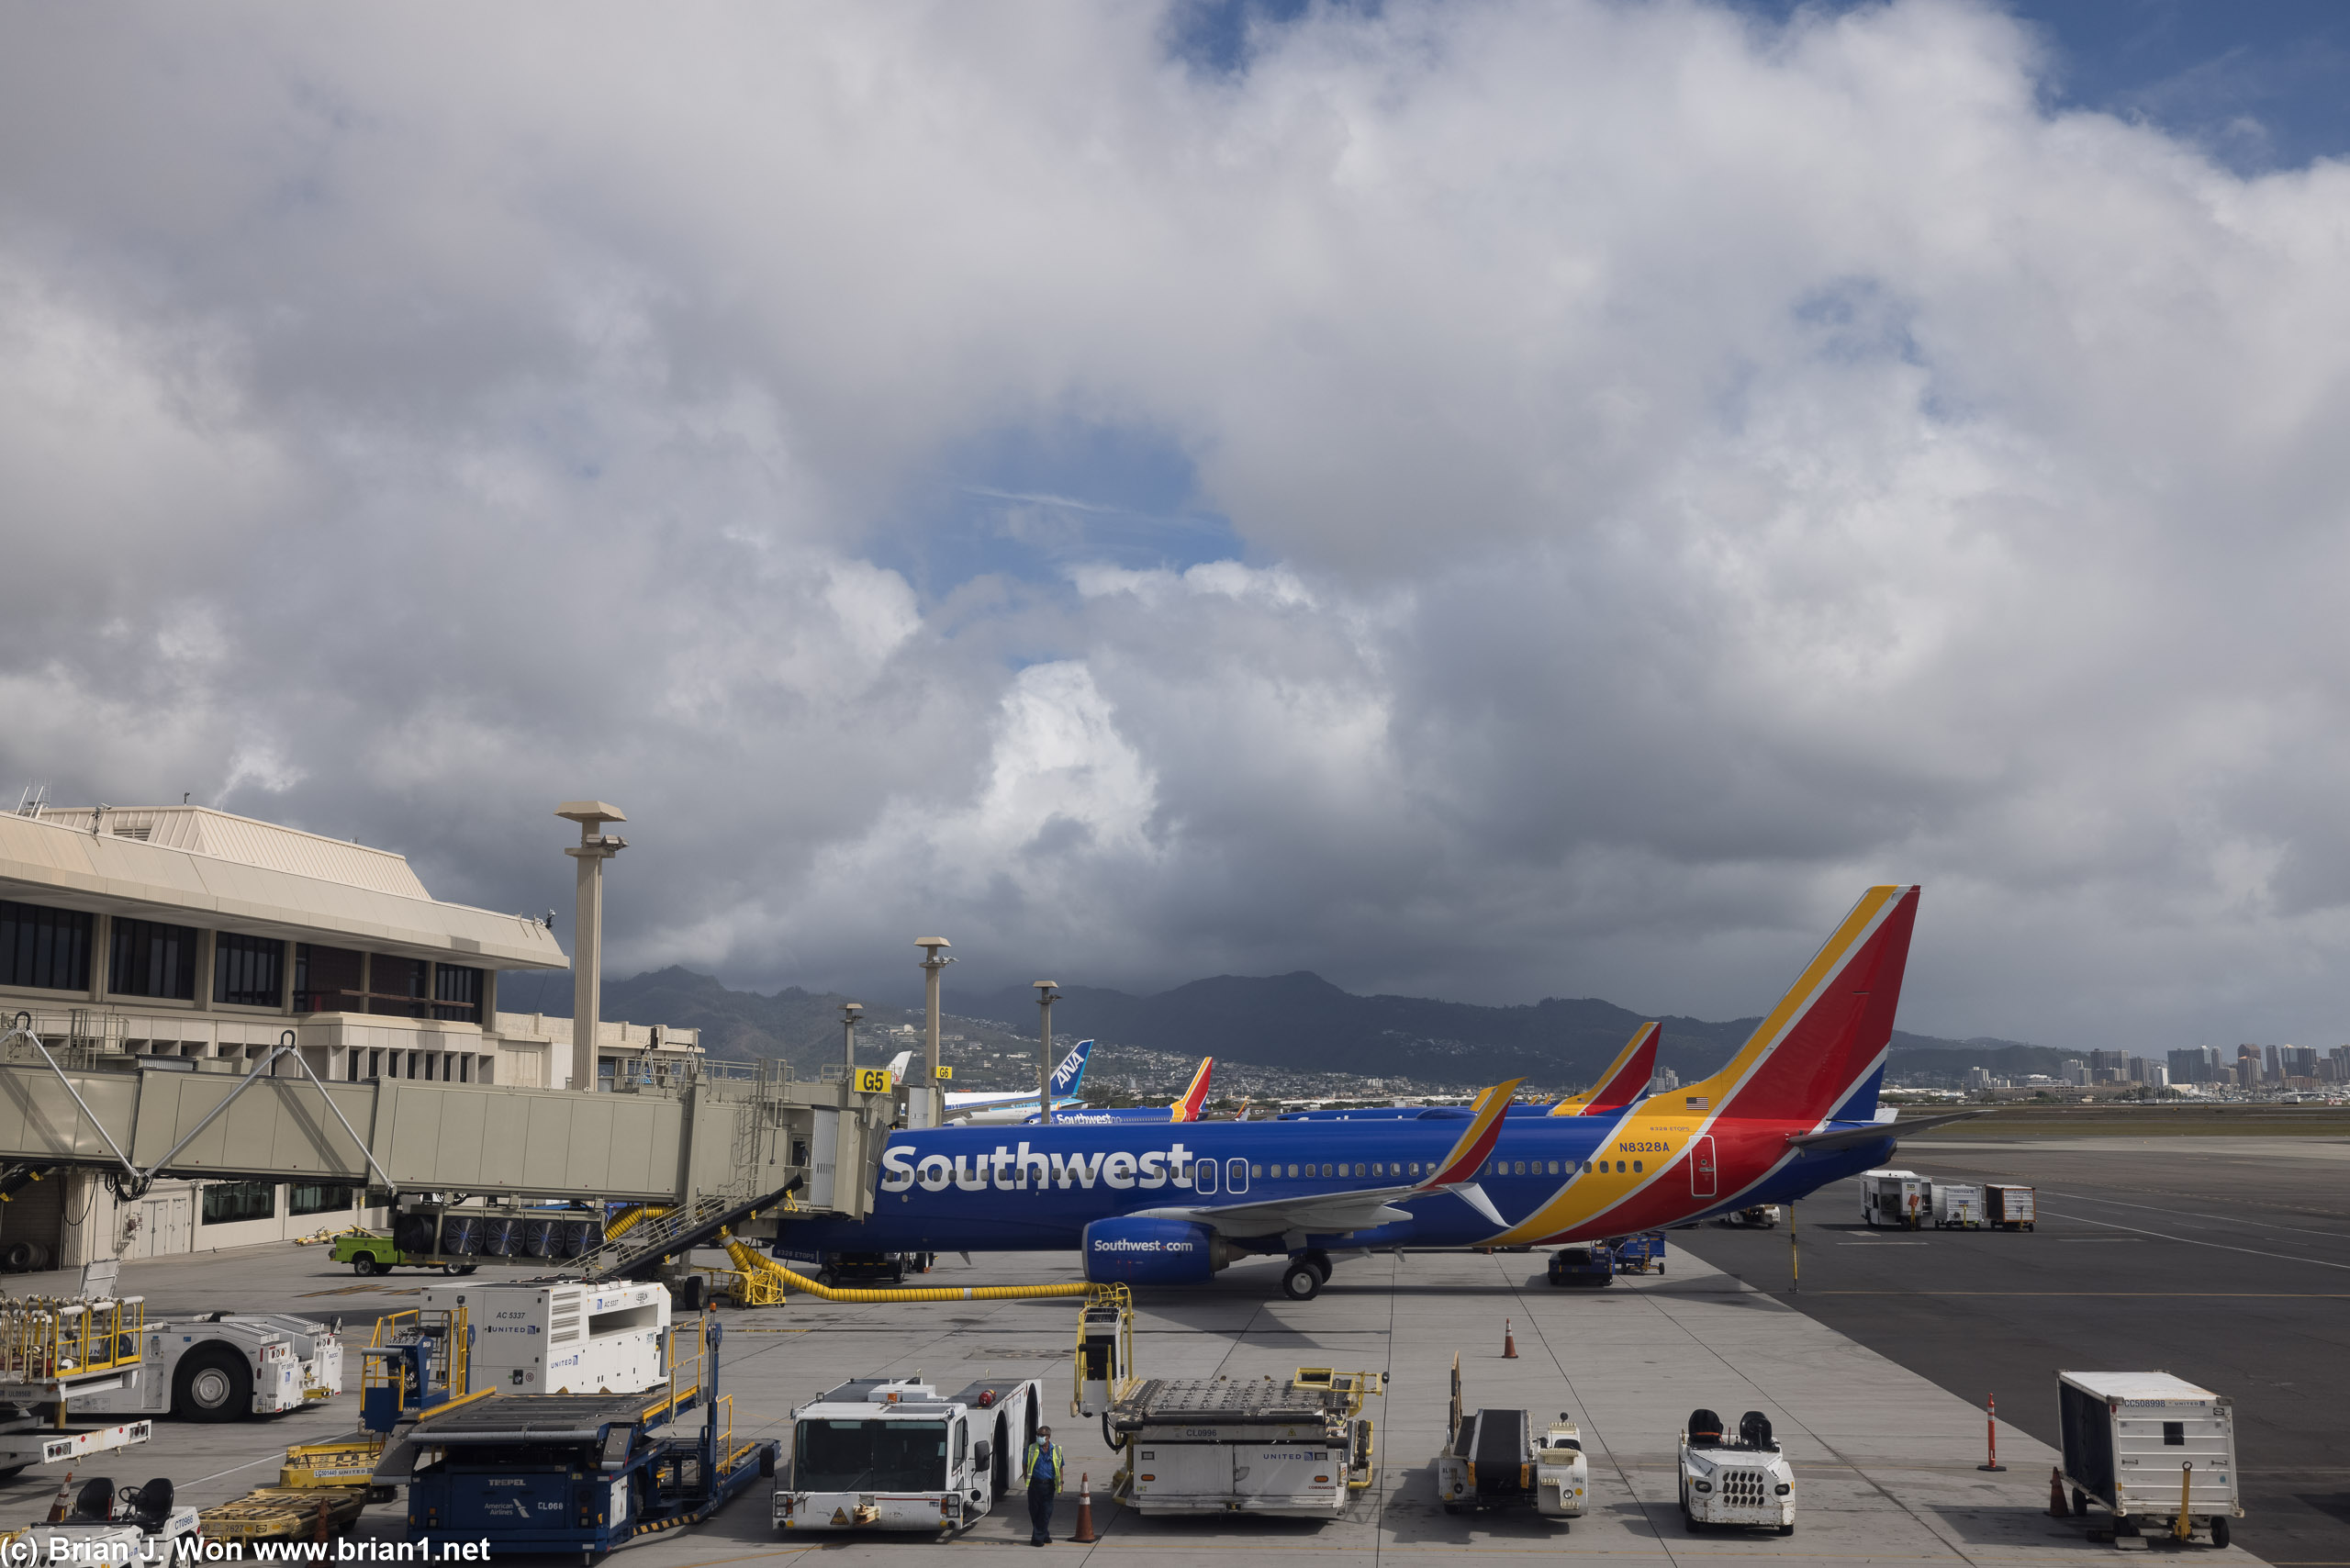 Southwest Airlines does booming business with their new Hawaii routes.